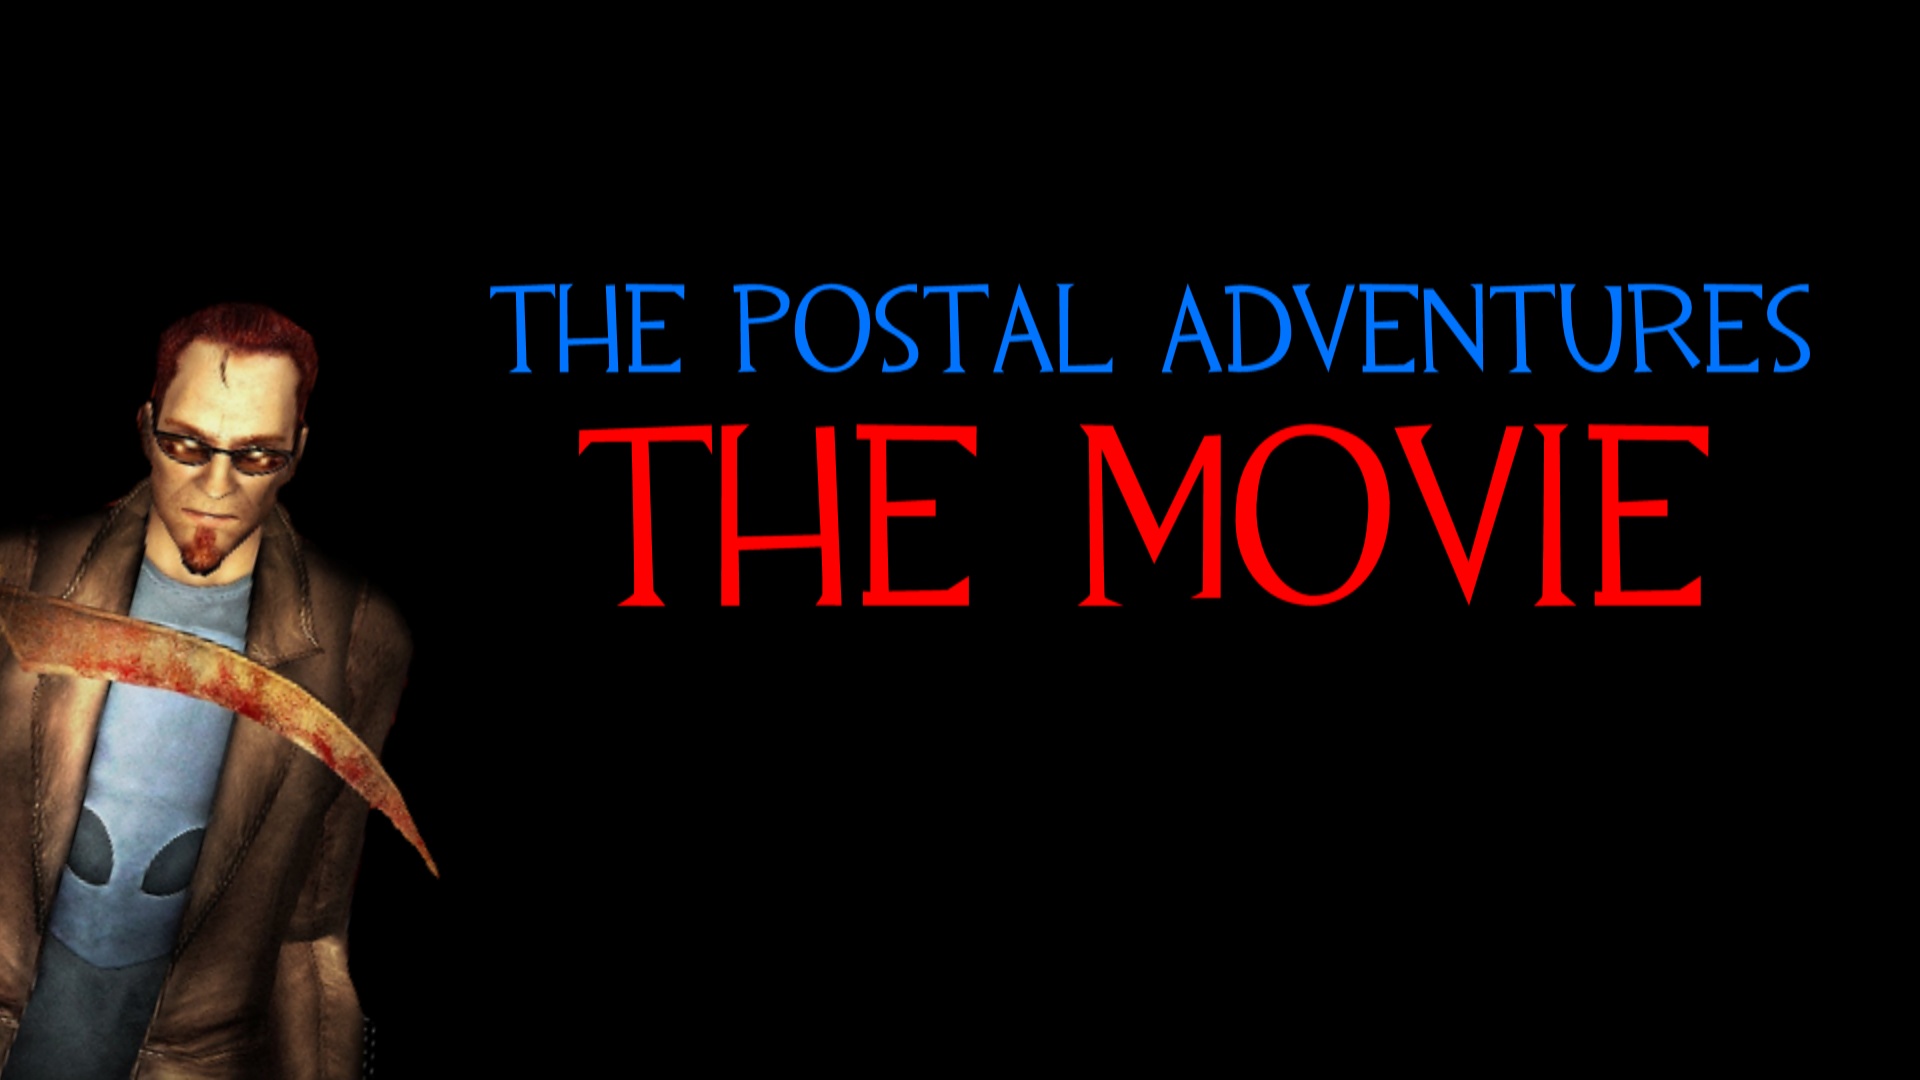 The adventure of the postal dude